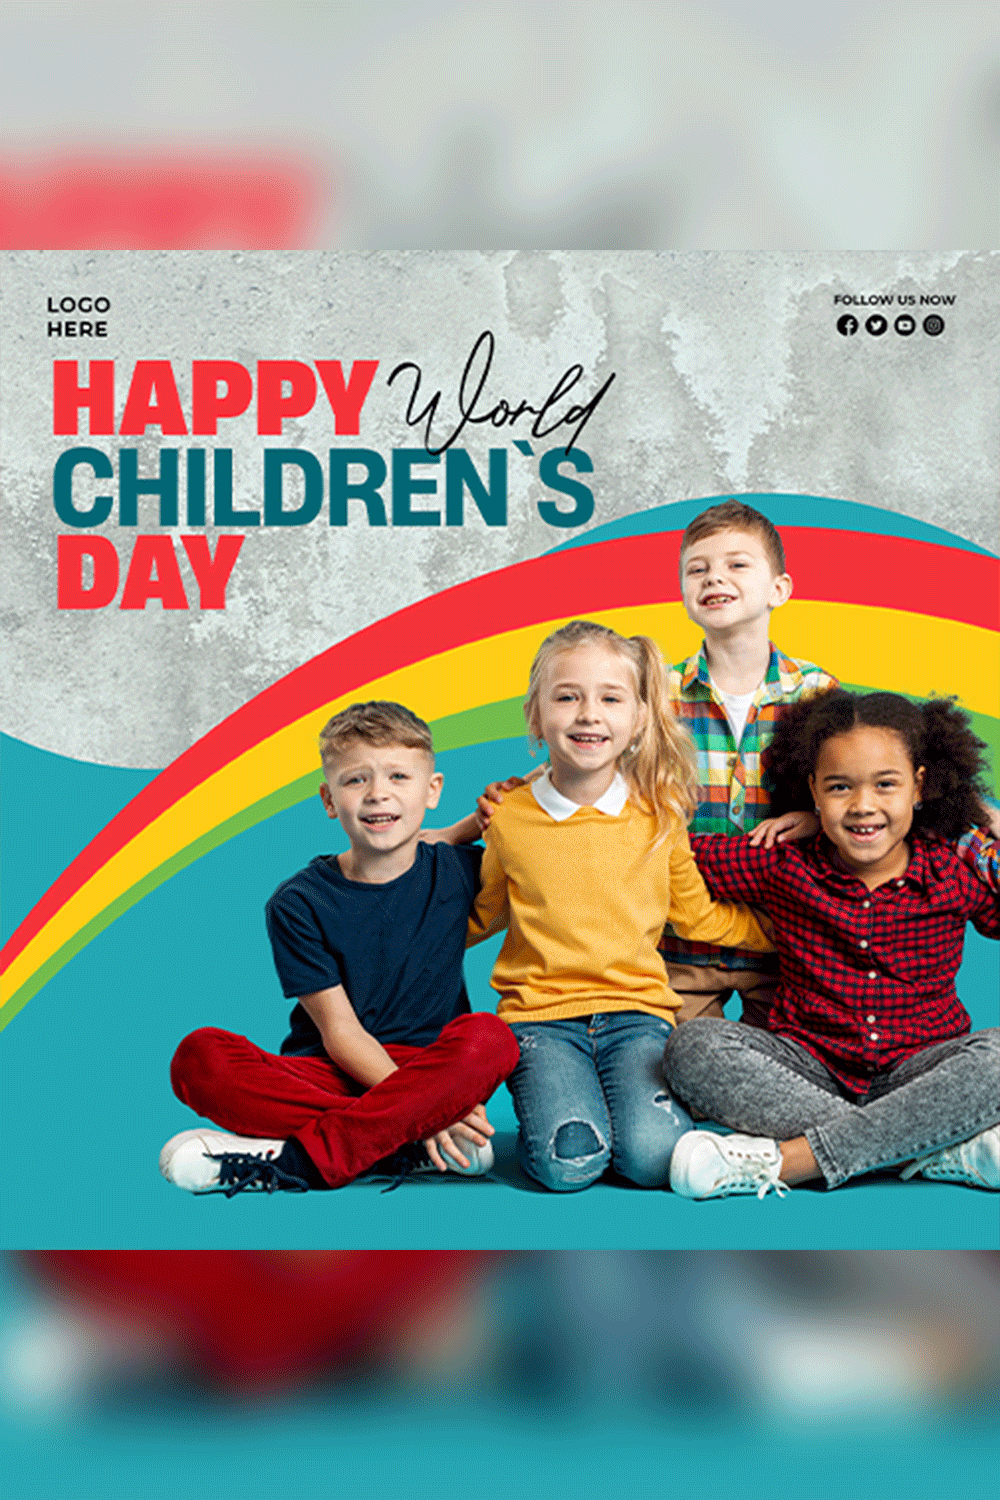 Happy world children's day with a rainbow social media post banner PSD pinterest preview image.